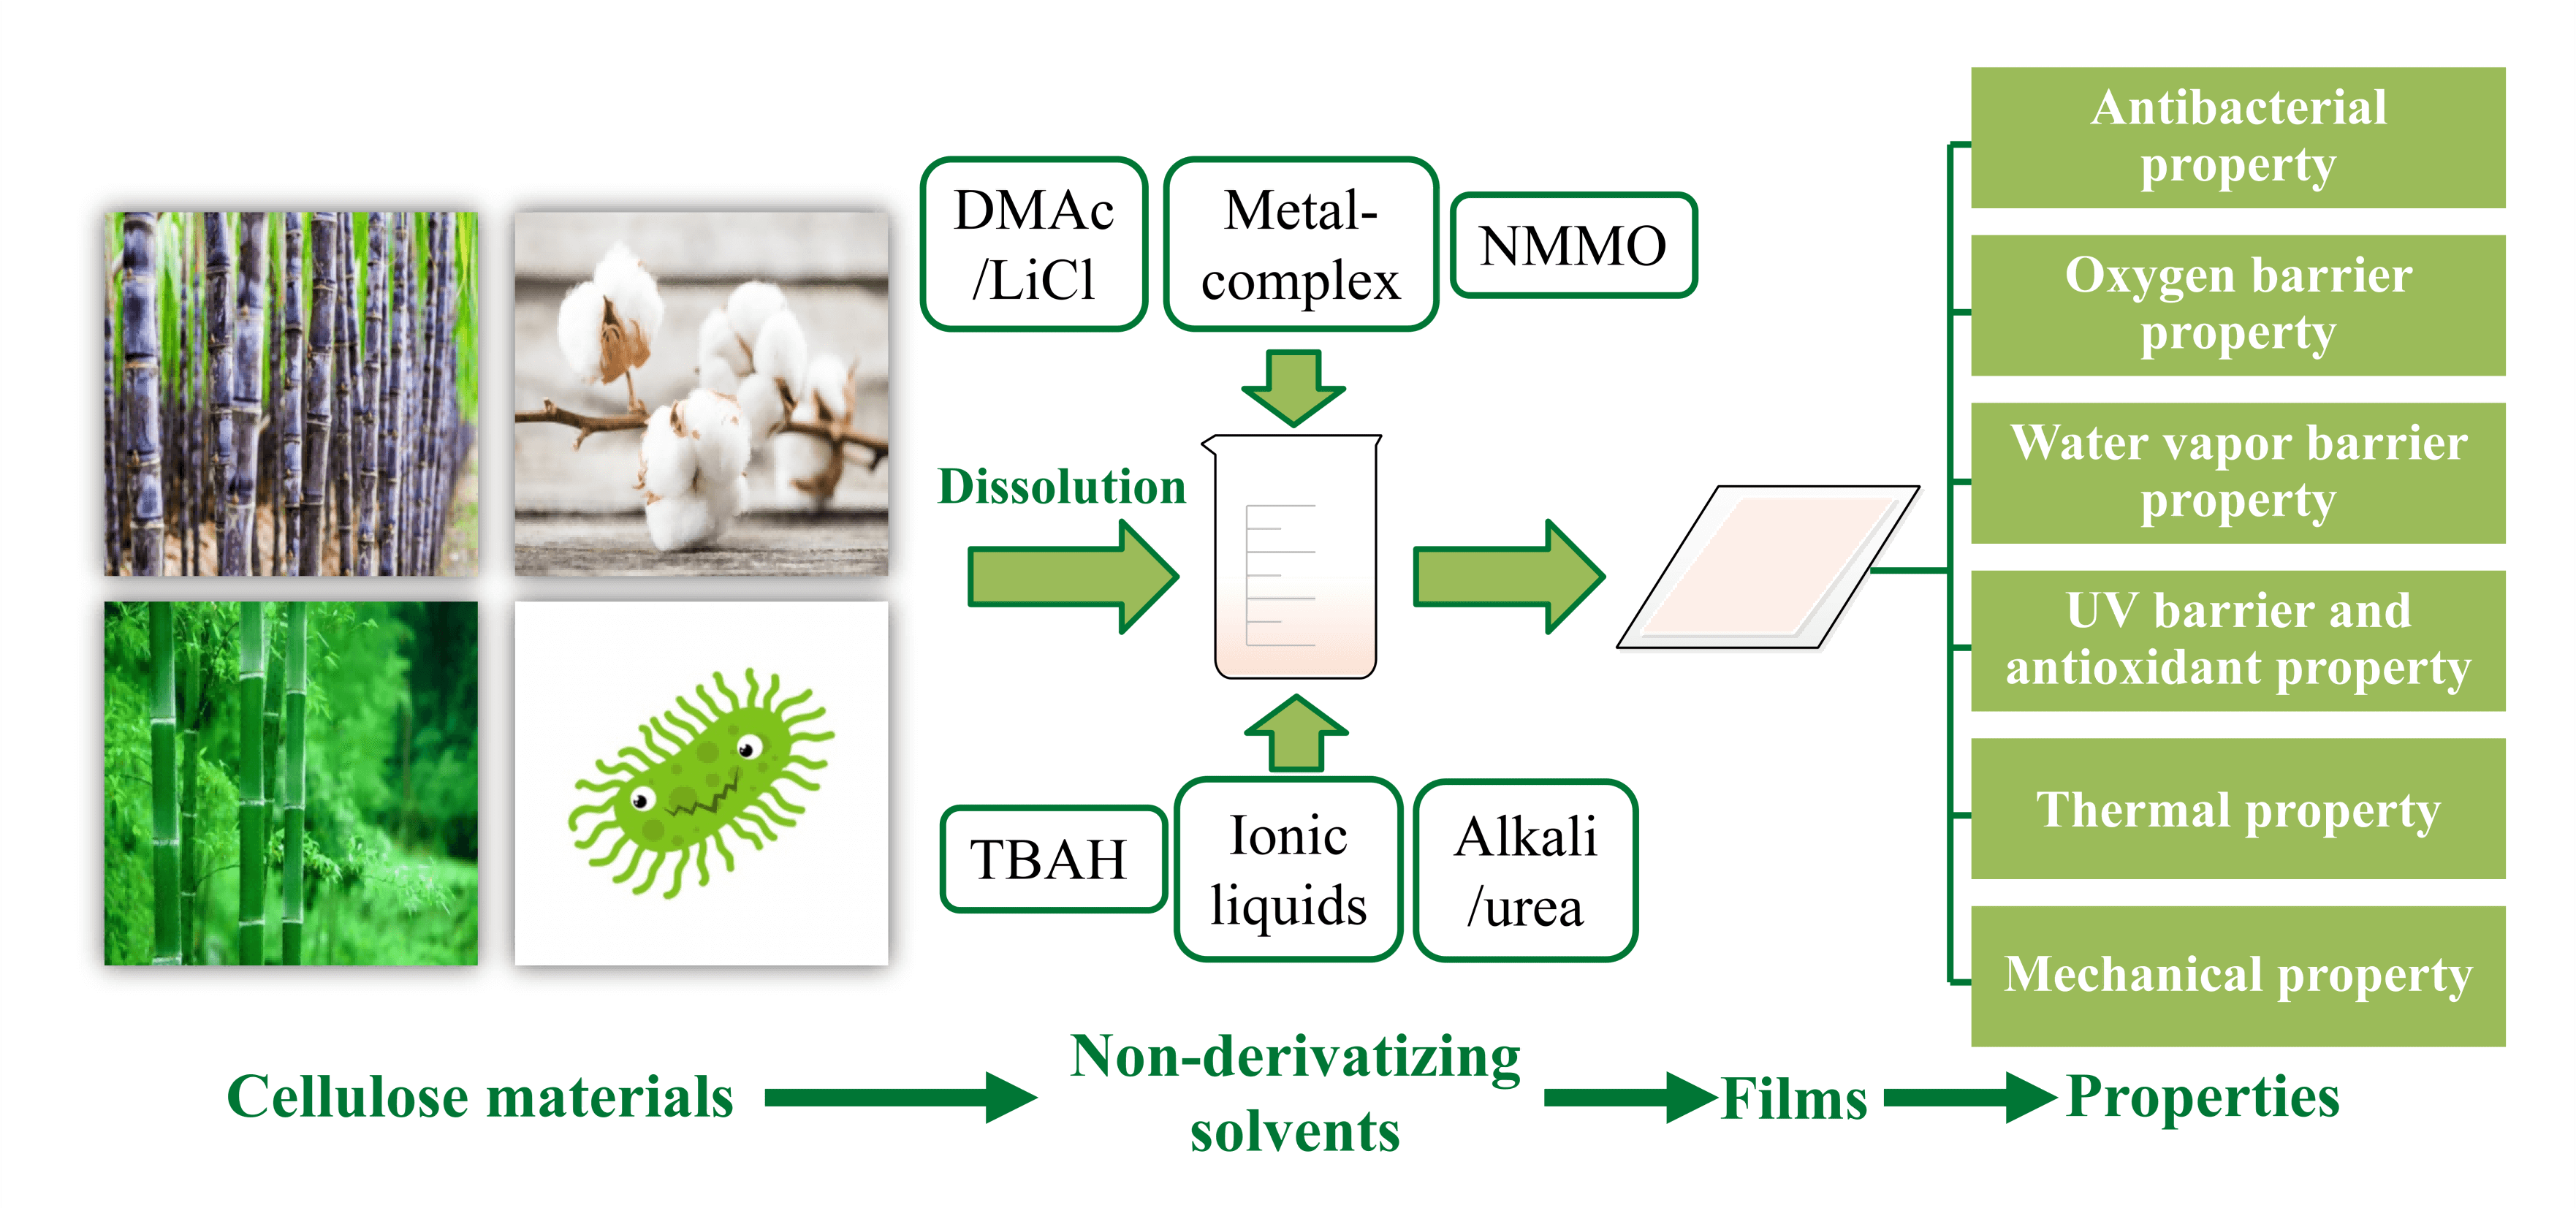 Cellulose-Based Films for Food Packaging Applications: Review of Preparation, Properties, and Prospects